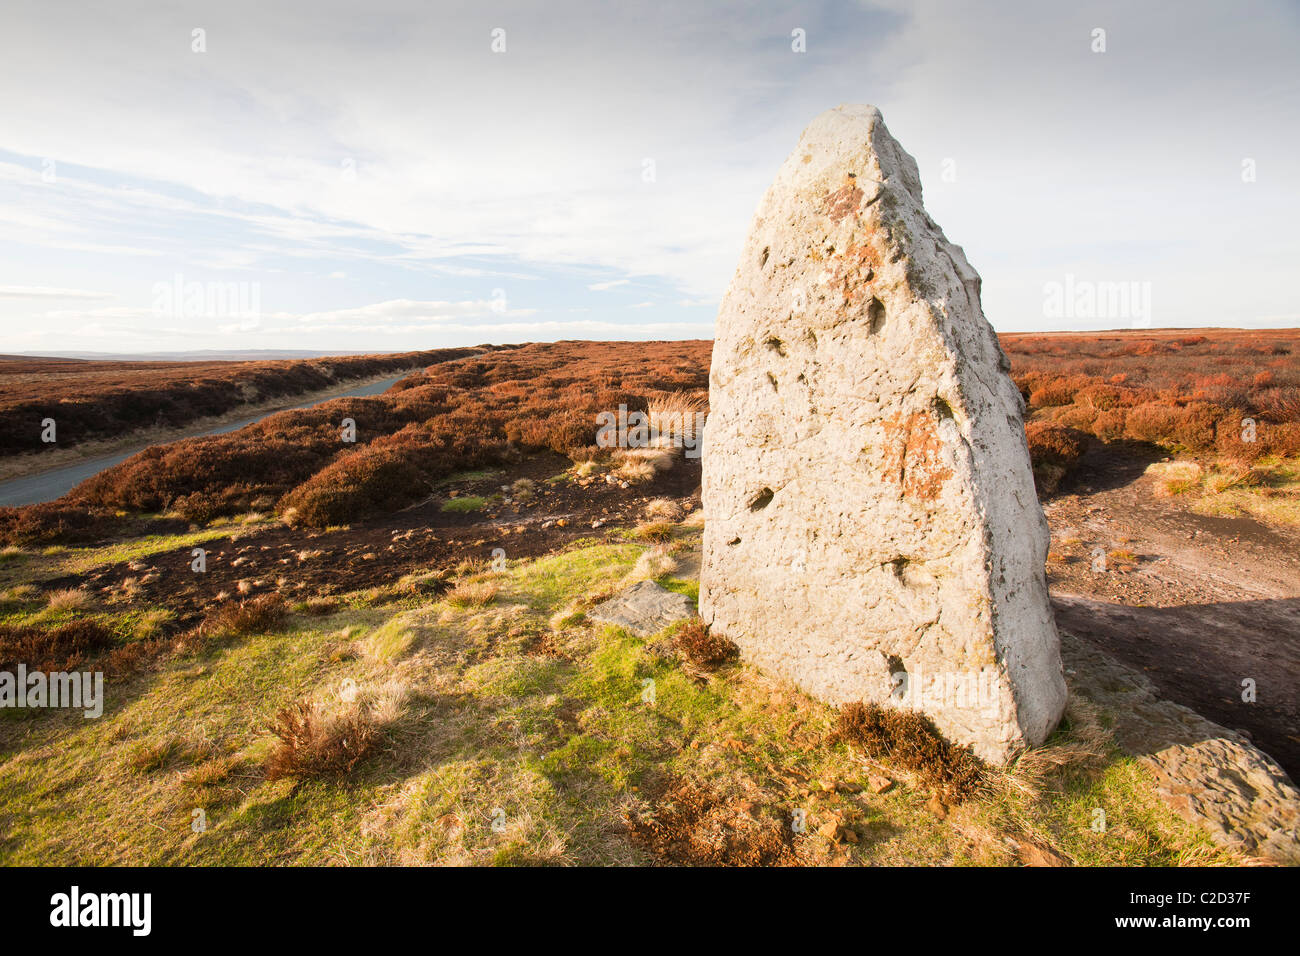 An ancient standing stone on Danby Moor in the North York Moors, Yorkshire, UK. Stock Photo